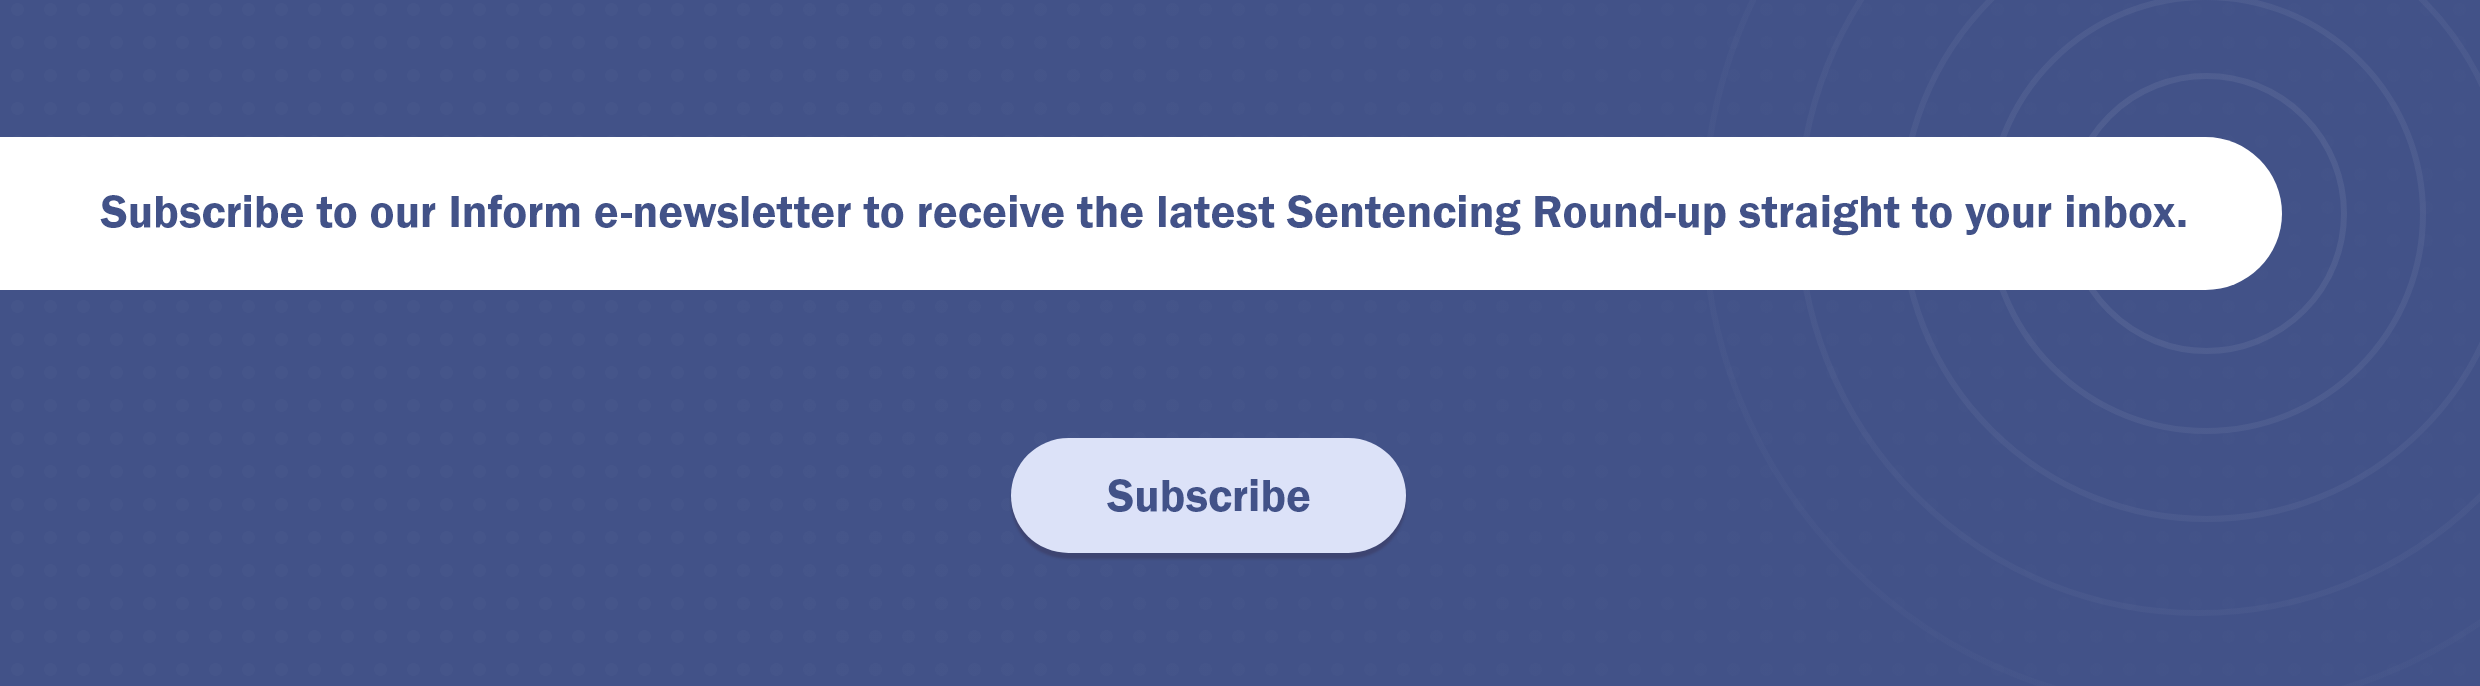   Subscribe to our Inform e-newsletter to receive the latest Sentencing Round-up straight to your inbox.